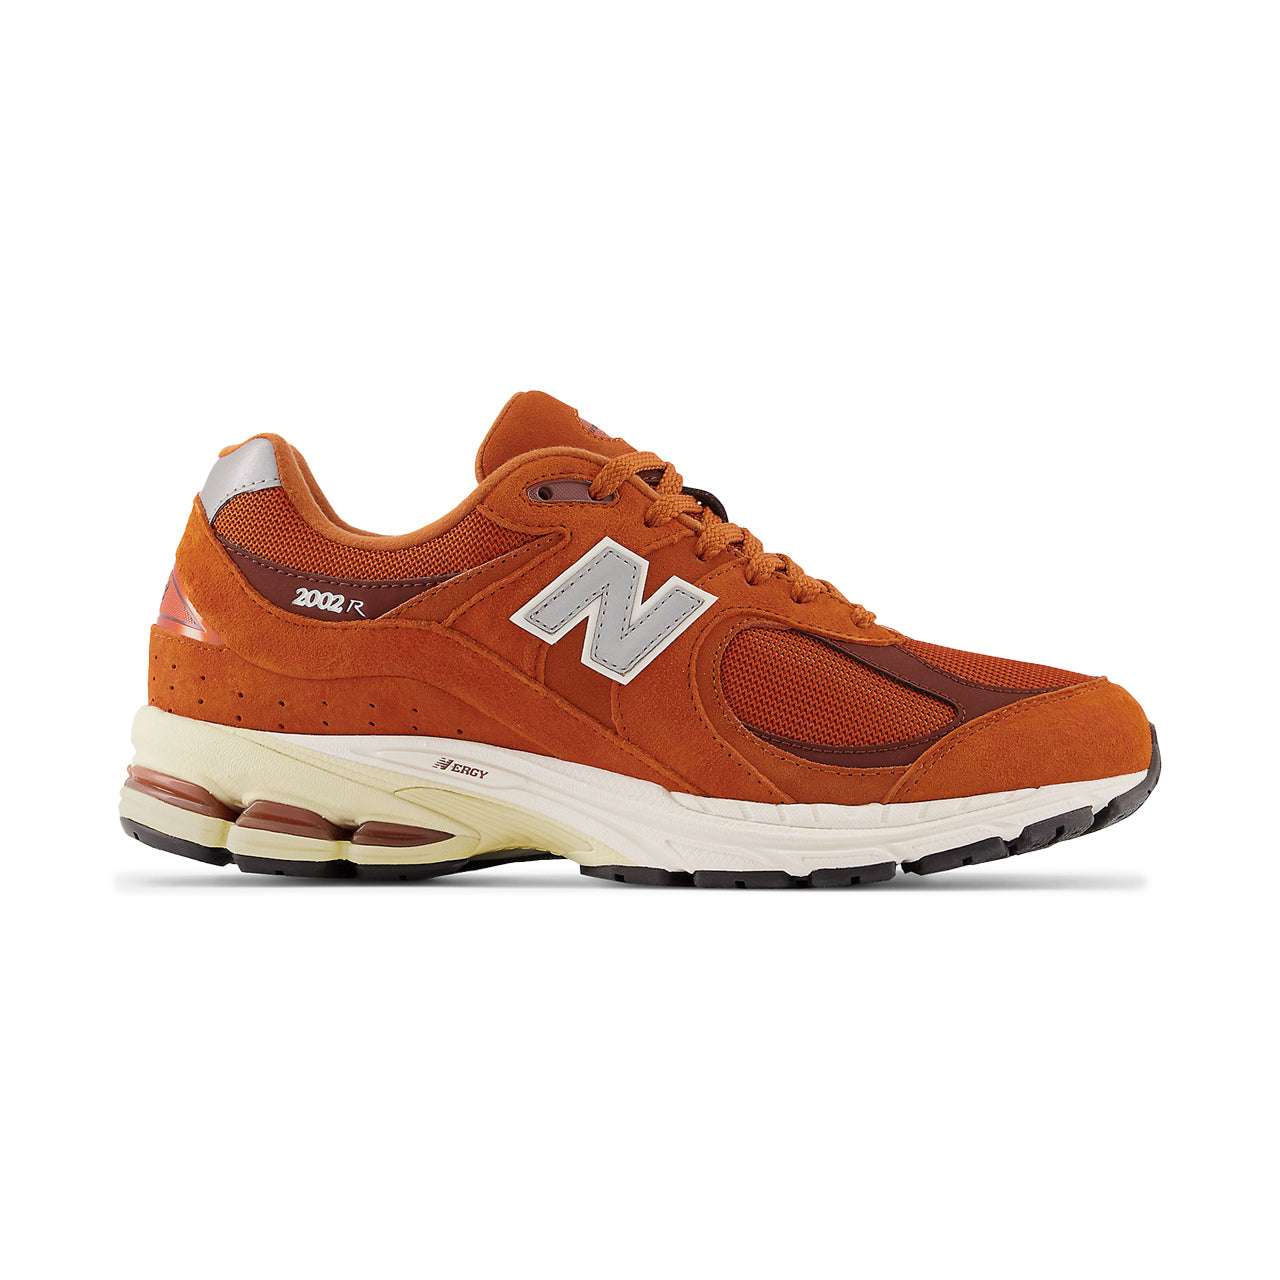 New Balance 2002R Rust Oxide Sneakers